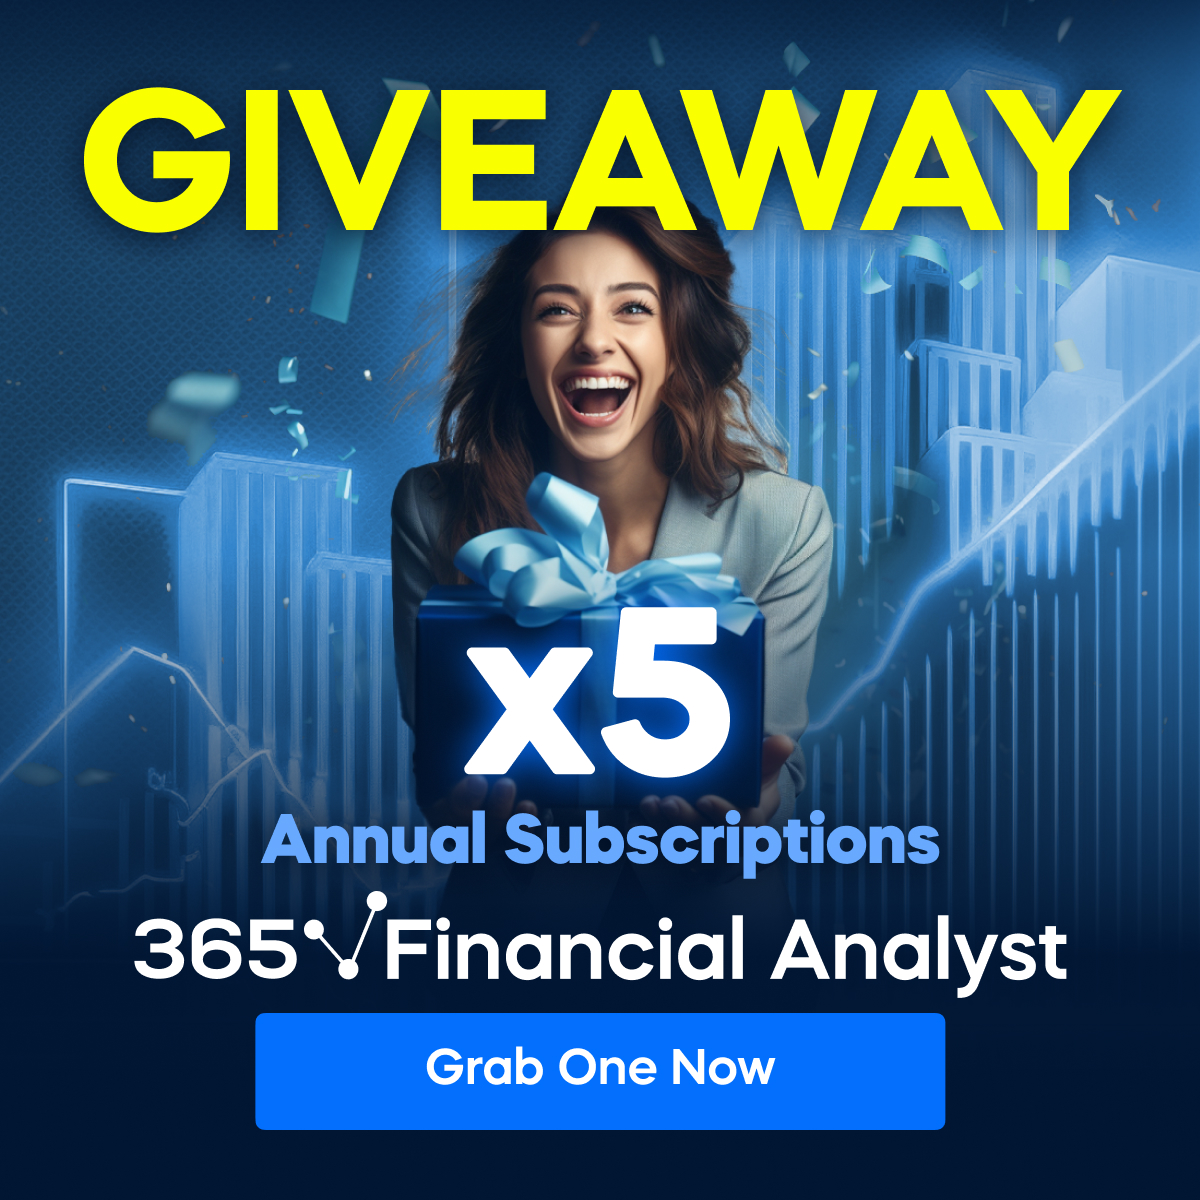 📢 Giveaway alert! Five Annual Plans to the 365 Financial Analyst await their proud owners. Enter our giveaway for a chance to win👉 bit.ly/49jsmNH

#learn365 #giveawaytime #financialanalyst #finance #financialliteracy #financialintelligence #financecareer #learnandearn